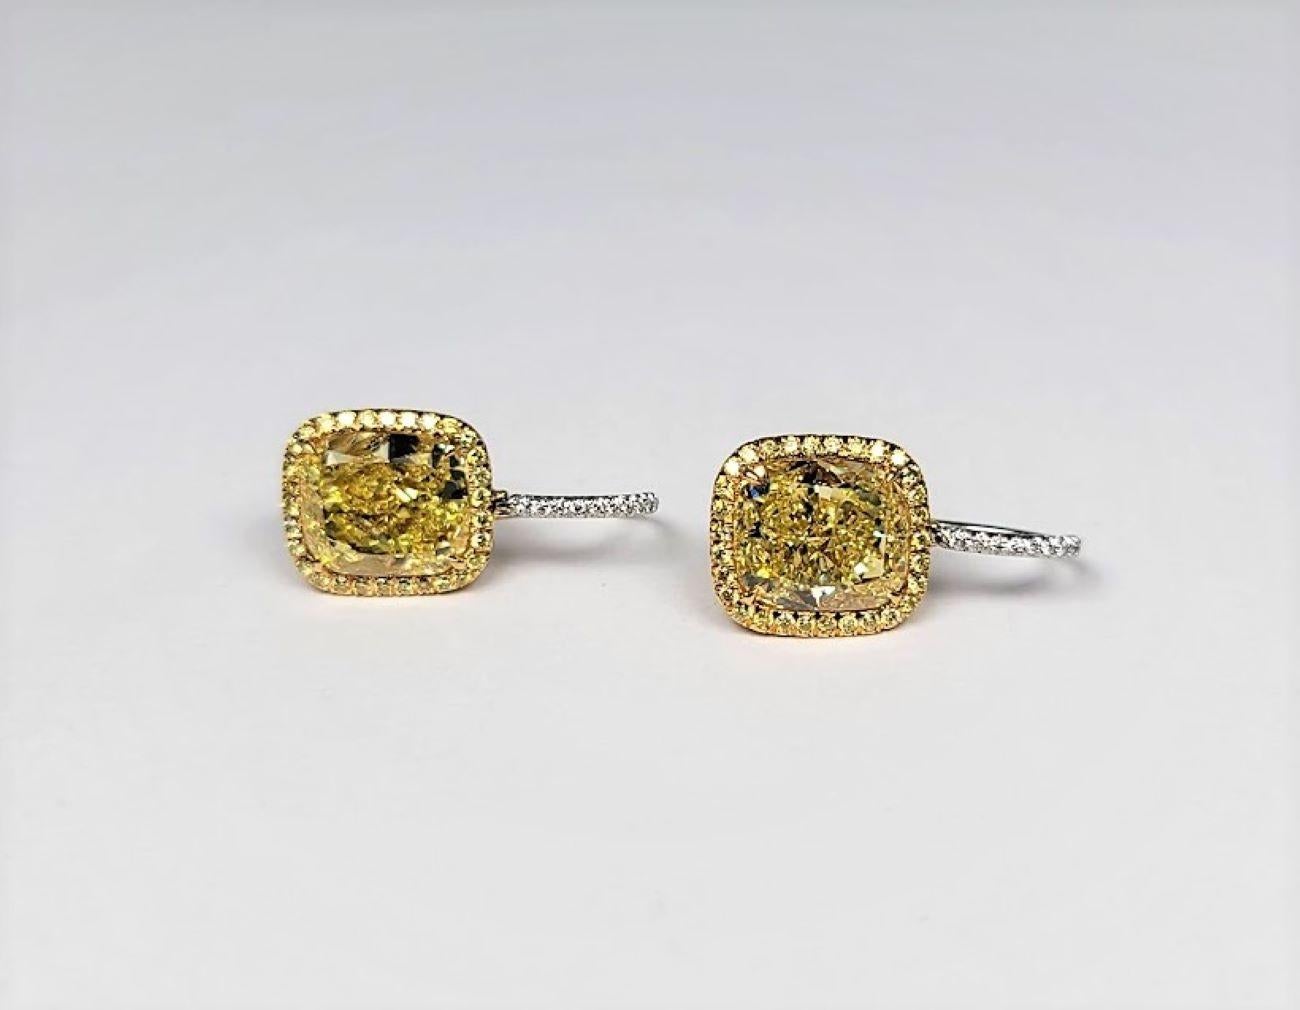 Set with a pair of cushion modified brilliant-cut natural color, fancy intense yellow diamonds, weighing 5.07 cts, VS 2, Fancy Intense Yellow (GIA),  and 5.08 cts, VVS 2, Fancy Intense Yellow (GIA) each within a frame of 113 pave-set, fancy yellow